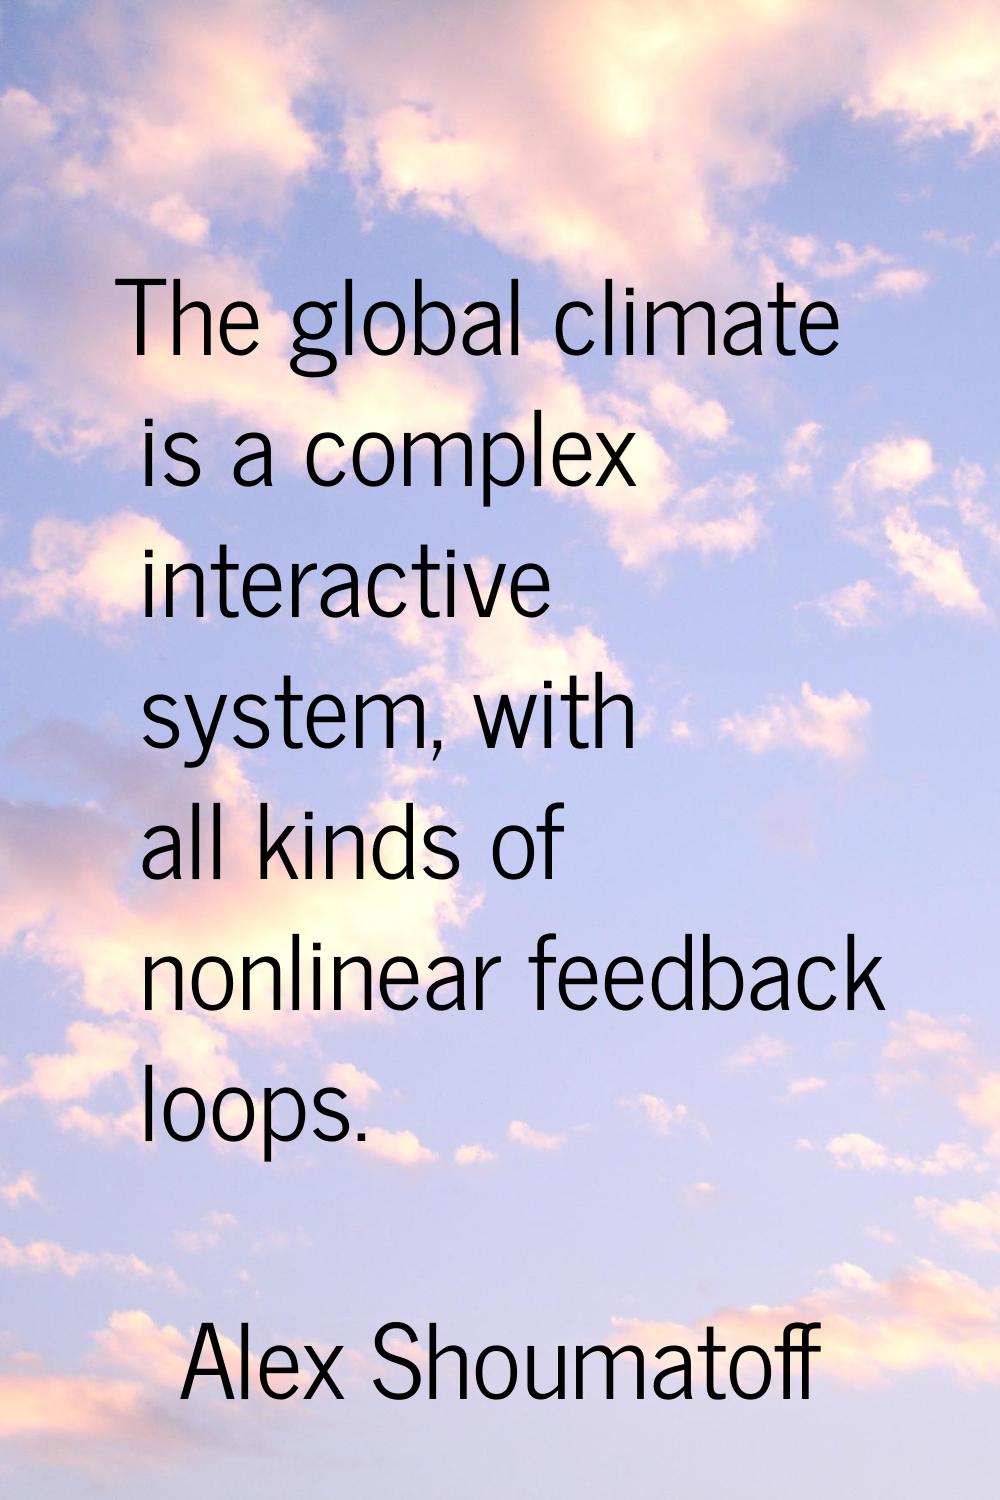 The global climate is a complex interactive system, with all kinds of nonlinear feedback loops.